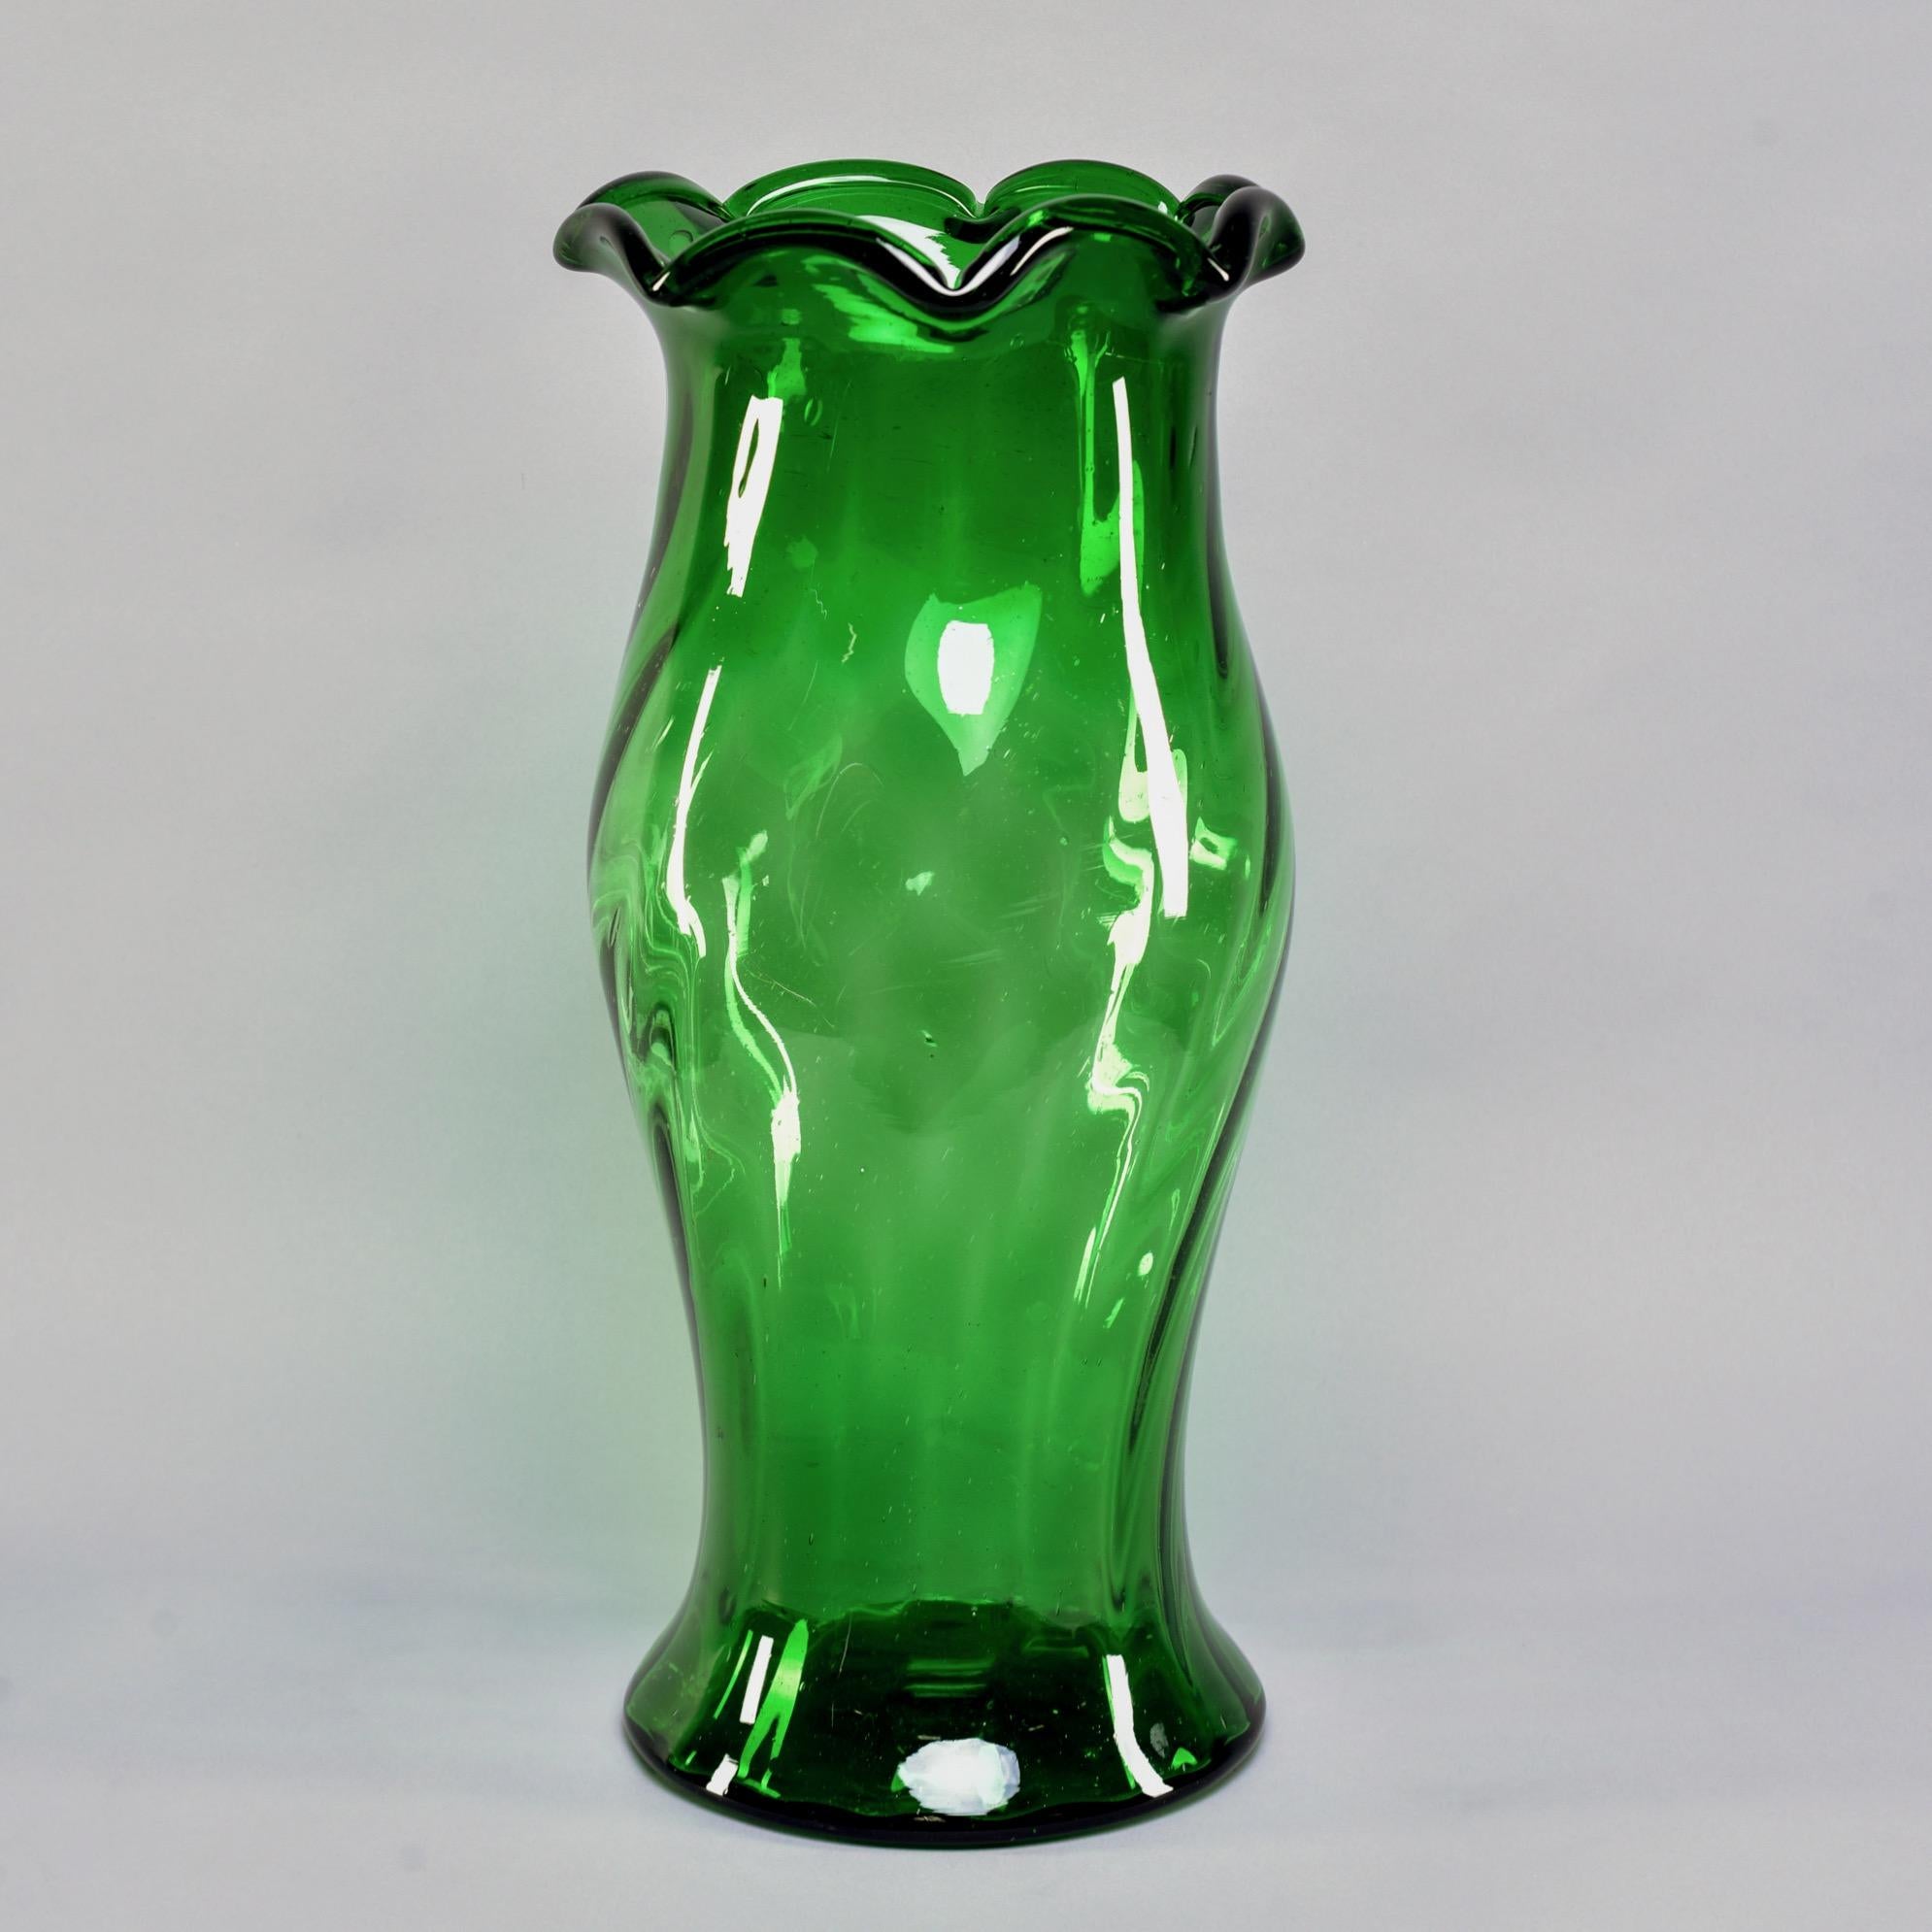 Tall green art glass vase found in Belgium with fluted top, circa 1950s. Stands 21